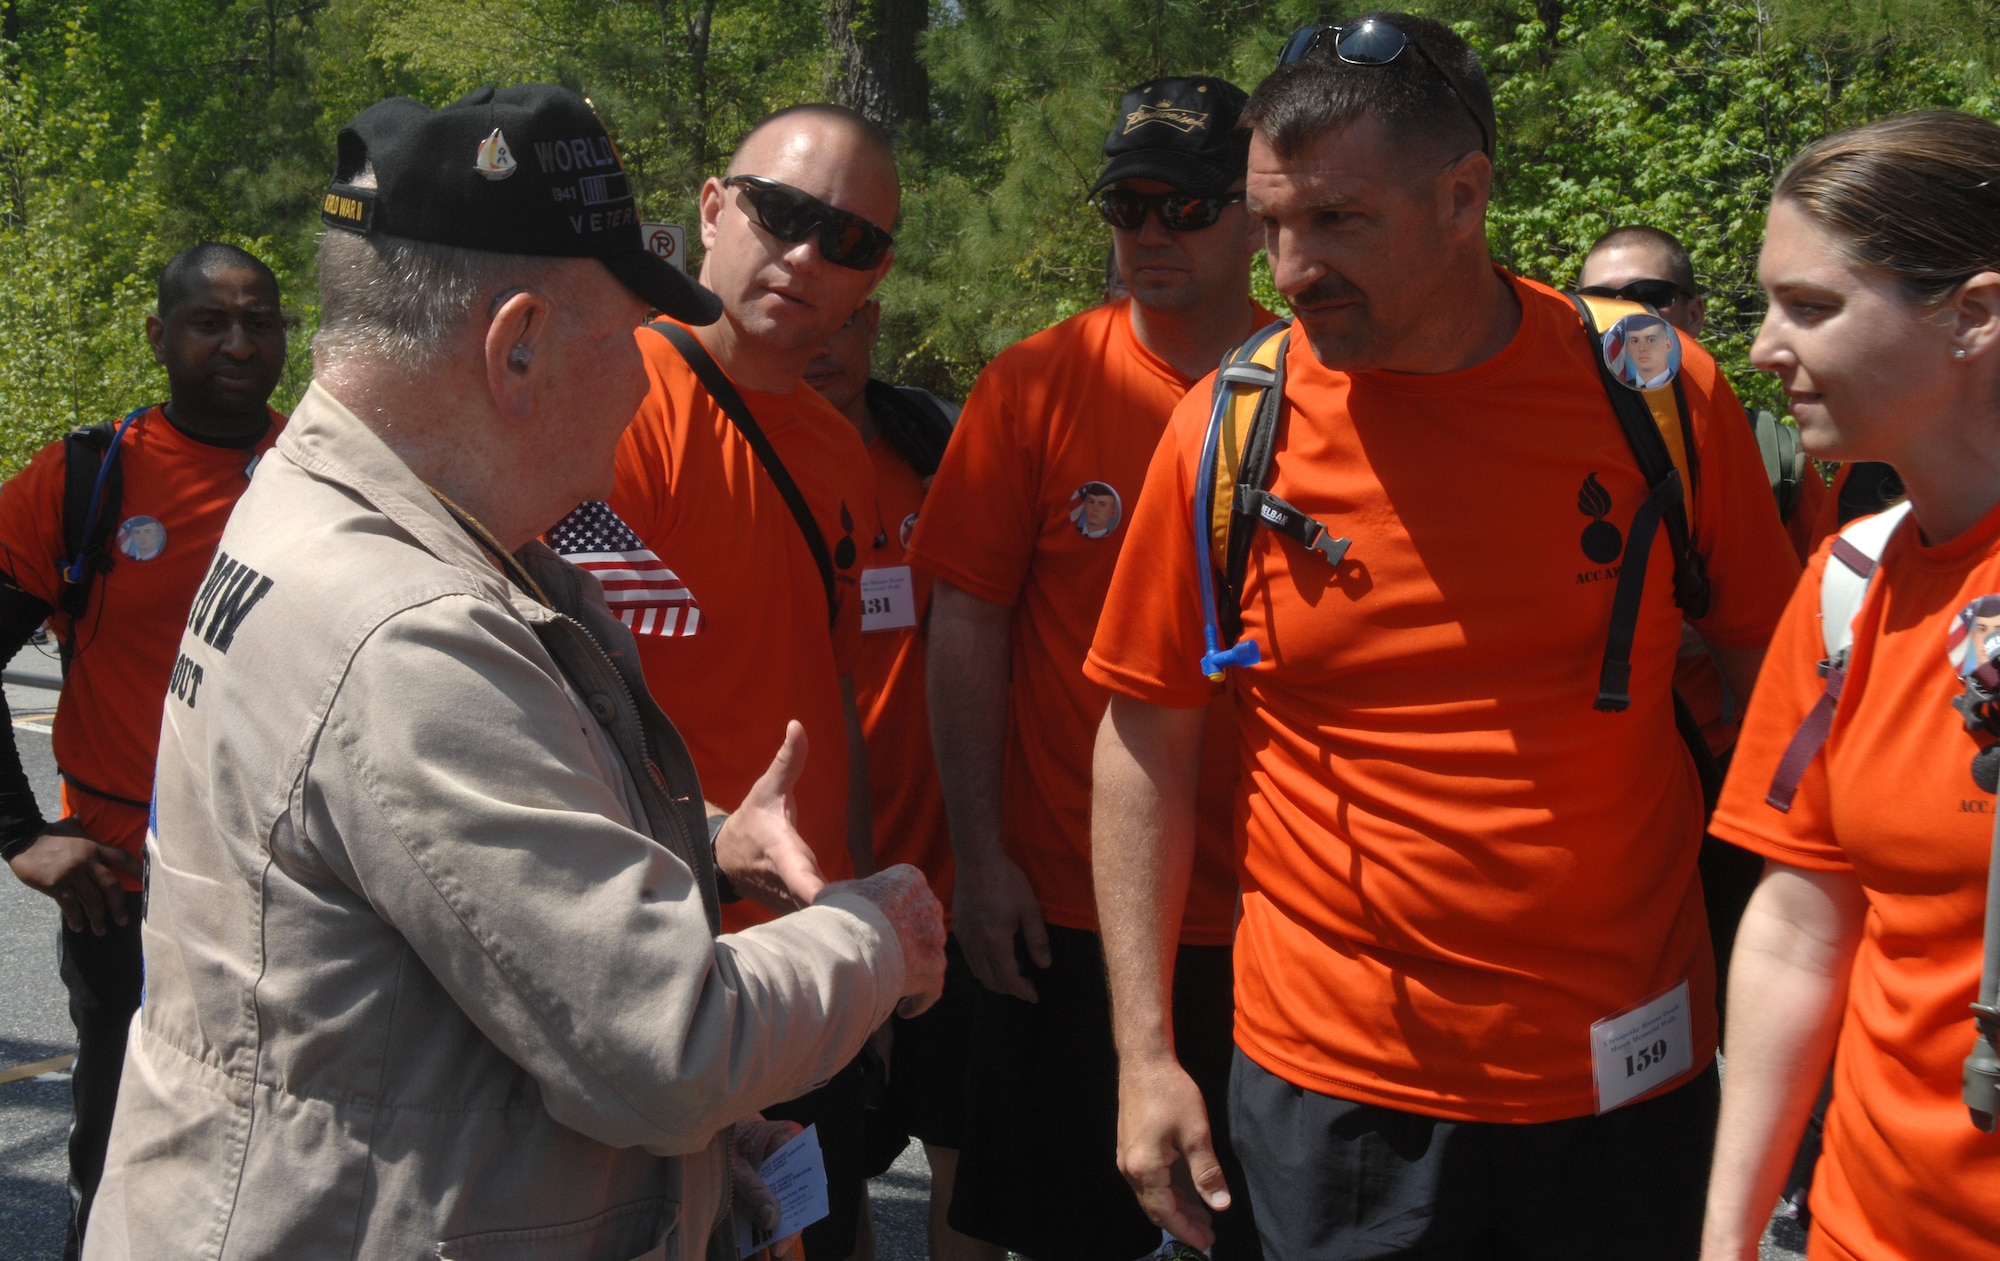 John Mims, a Bataan Death March survivor, thanks Airmen from the 1st Maintenance Squadron ammo shop for walking the Bataan Death March memorial walk at Chesapeake, Va., April 27, 2013. Mims thanked and saluted every participant who passed him towards the end of the 16.6-mile journey. (U.S. Air Force photo by Airman 1st Class Austin Harvill/Released)